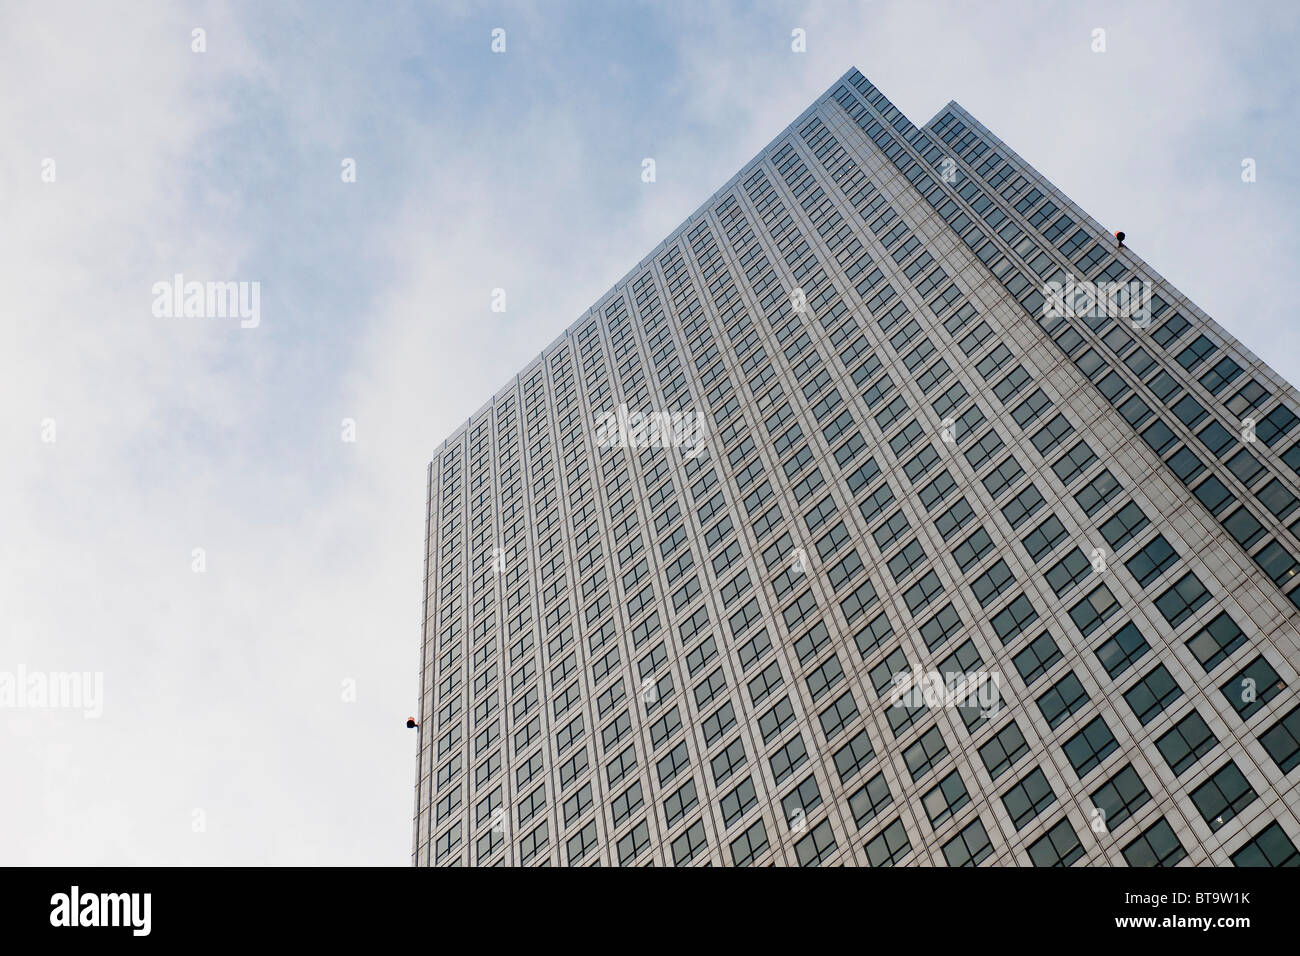 Canary Wharf, Financial district in London, UK Stock Photo